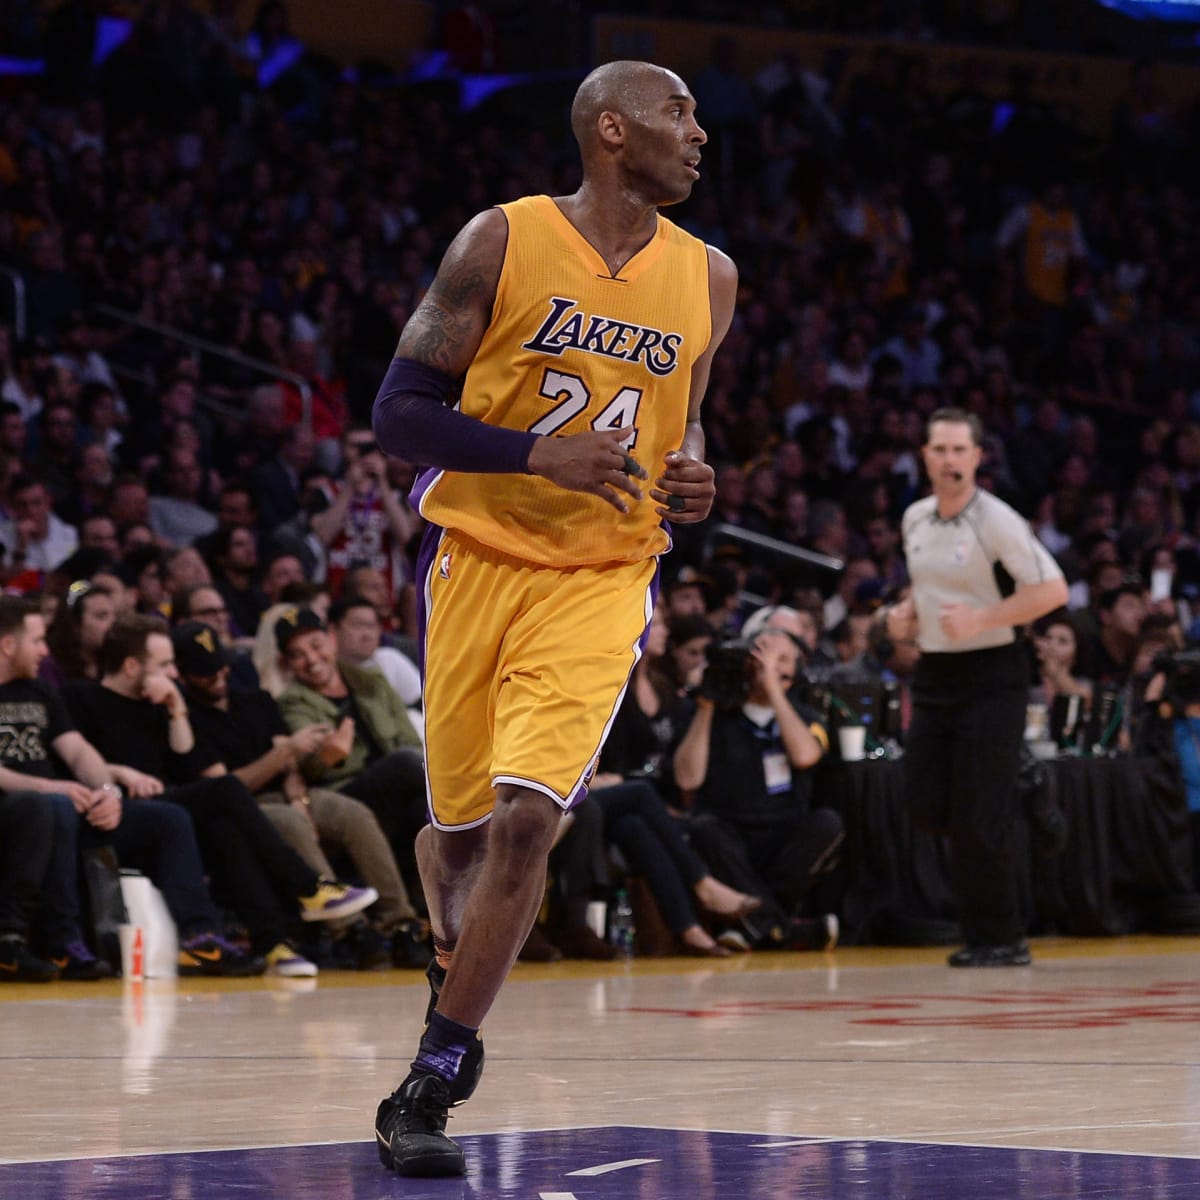 Kobe Bryant's Signed Jersey From MVP Season Sells For $5.8 Mil At Auction